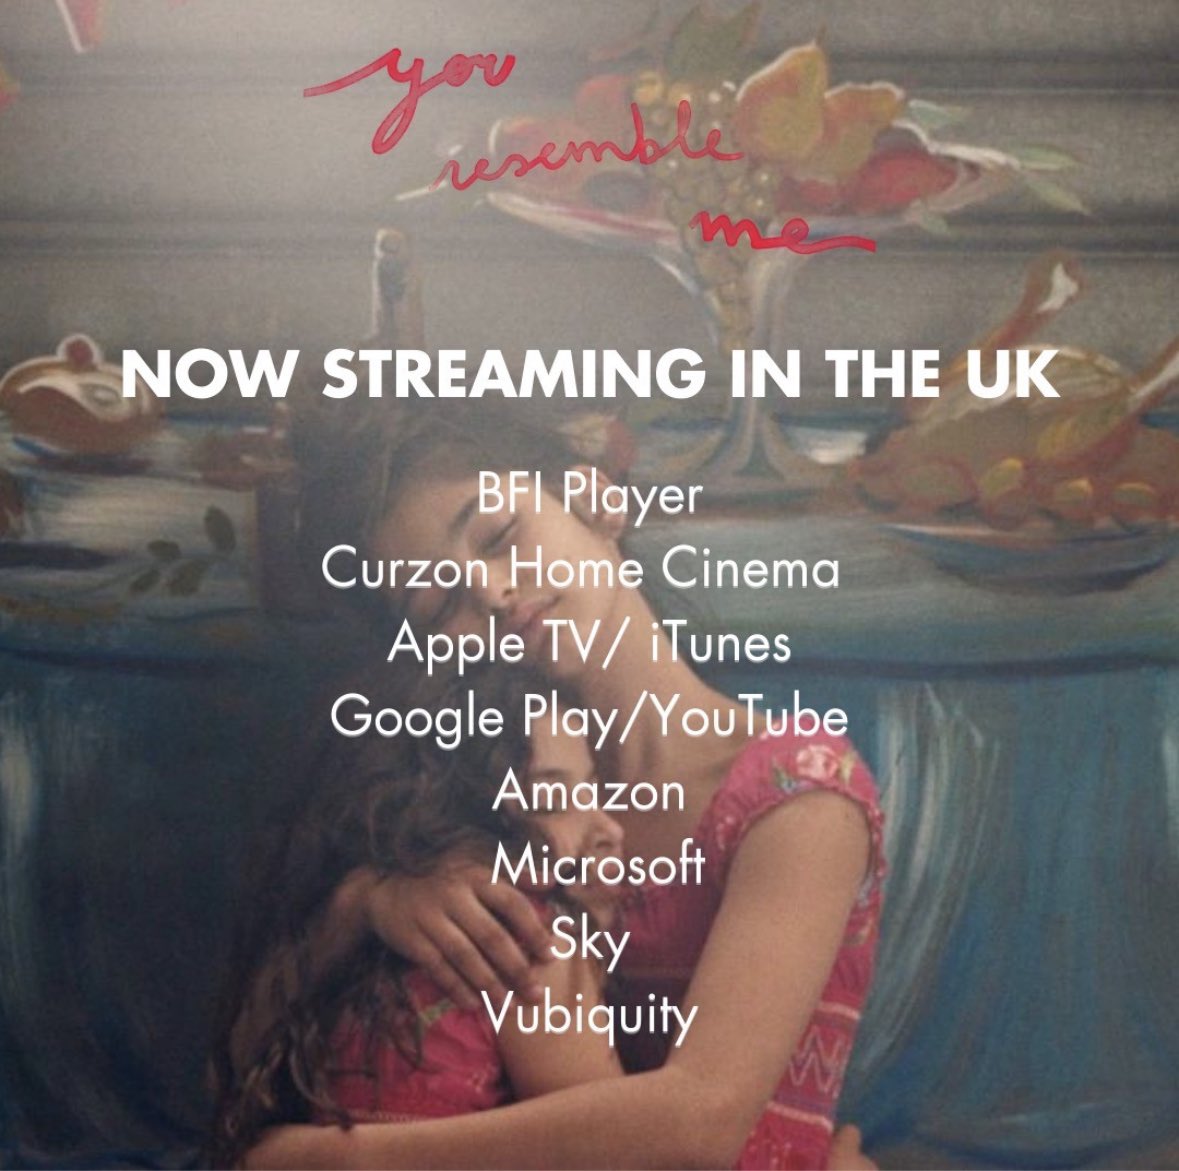 “You Resemble Me” is streaming in the UK! Don’t miss it! youresembleme.com